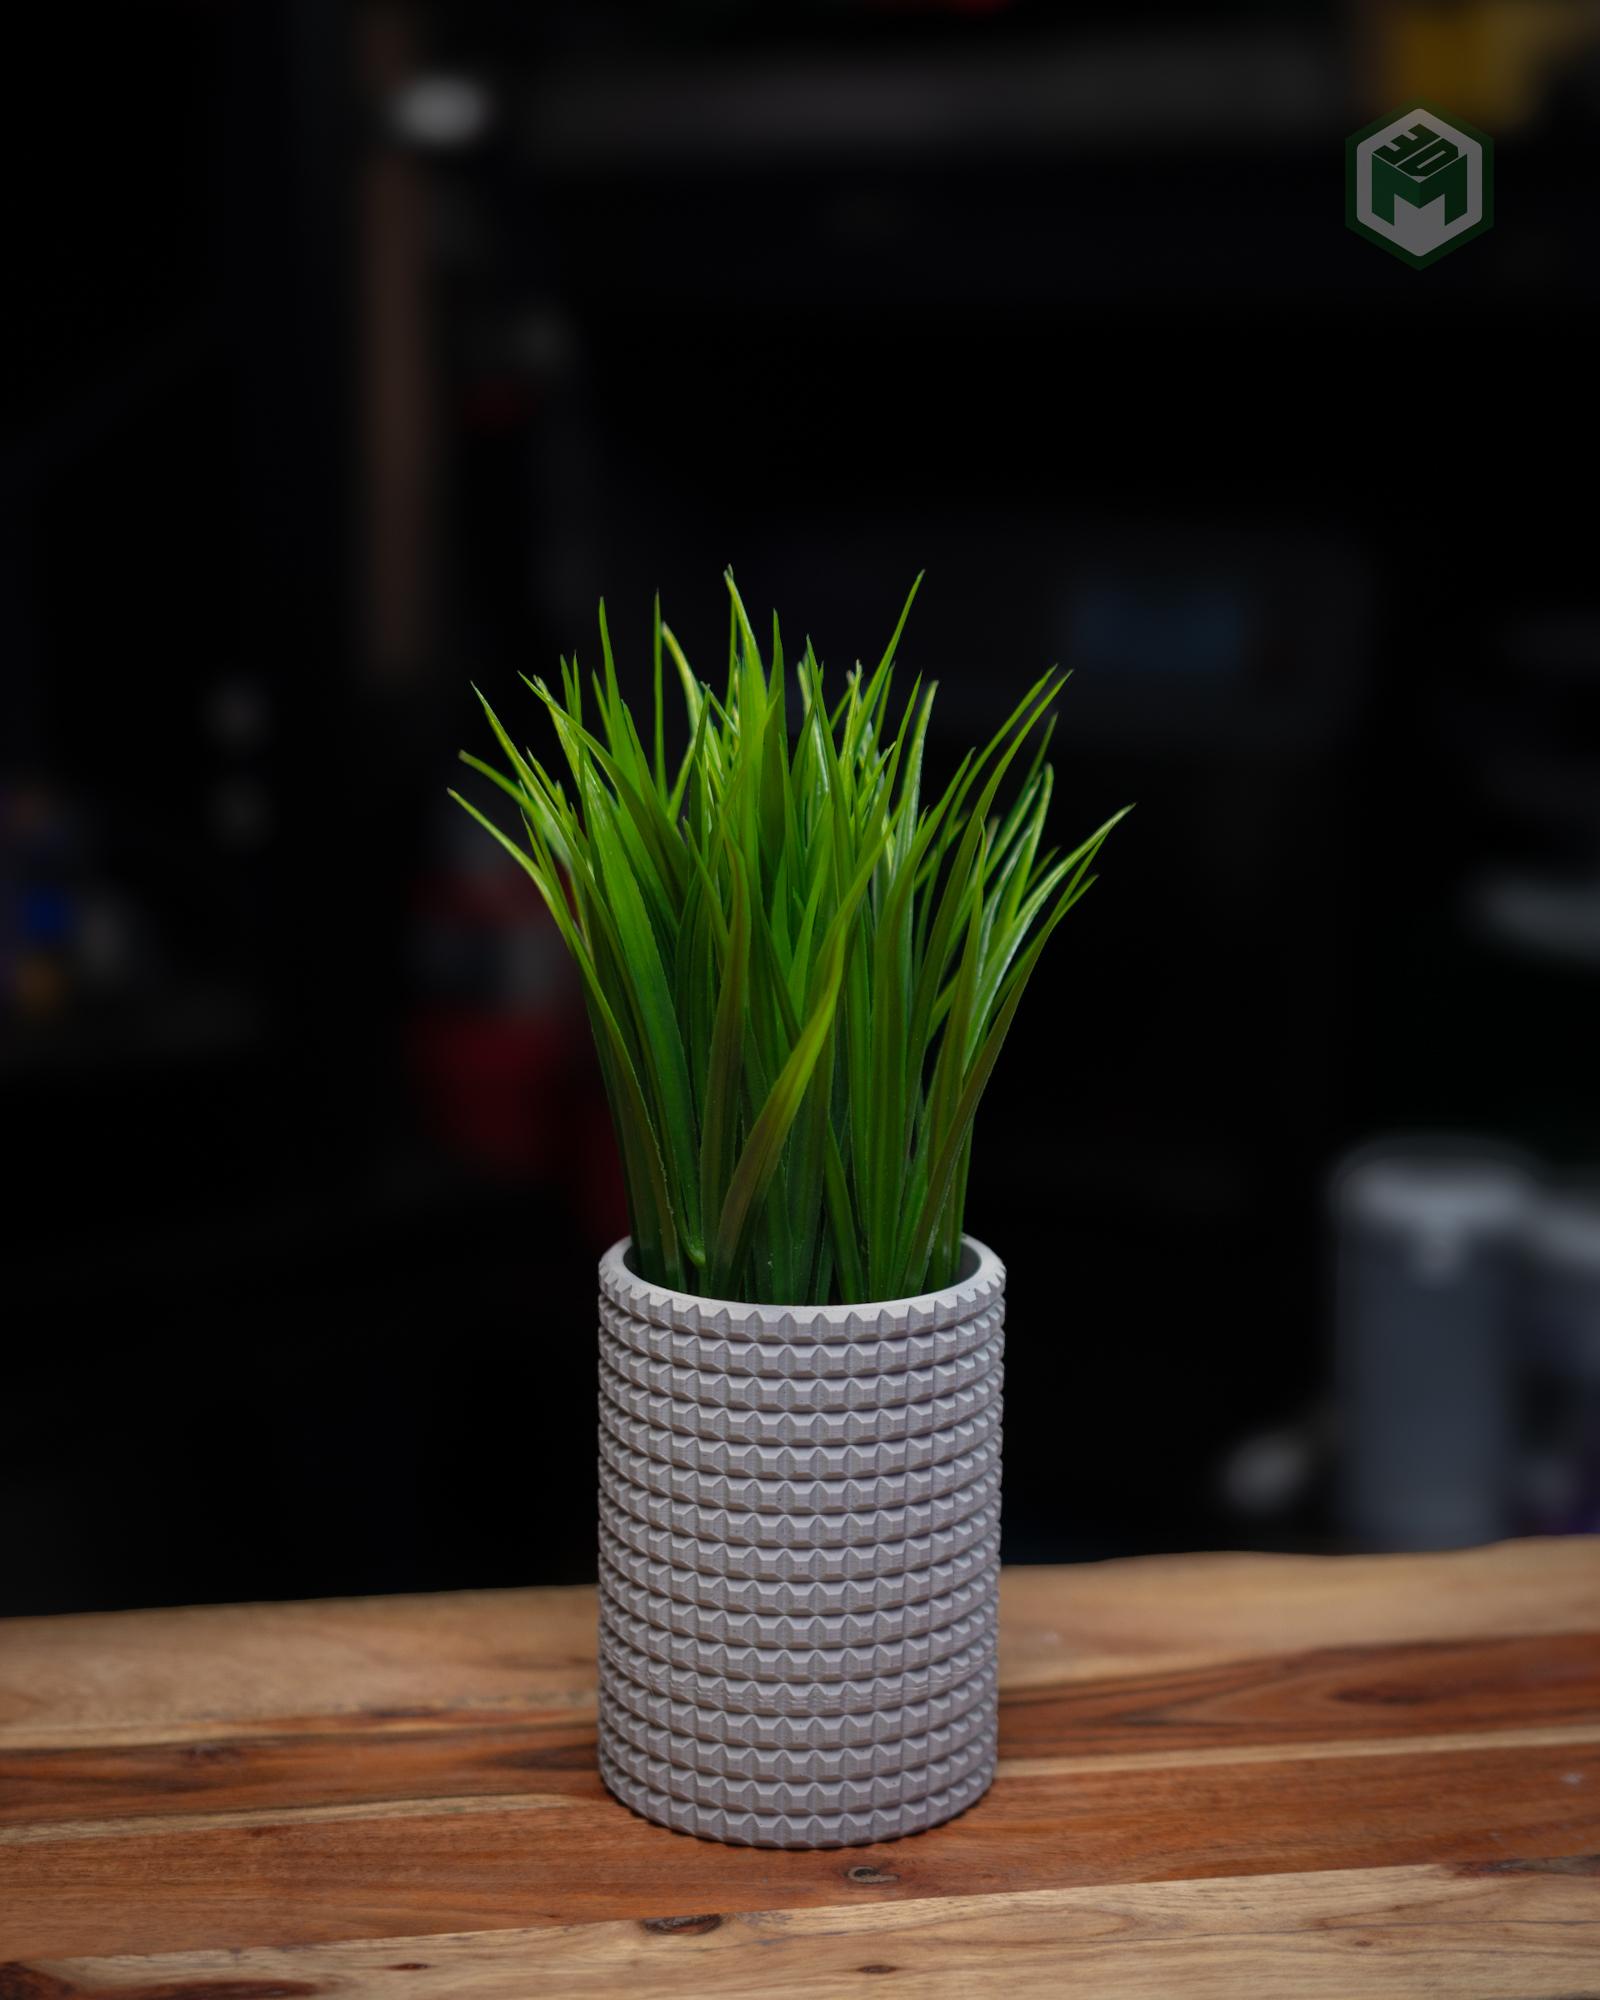 Studded Pattern Planter with Locking Drip Tray 3d model